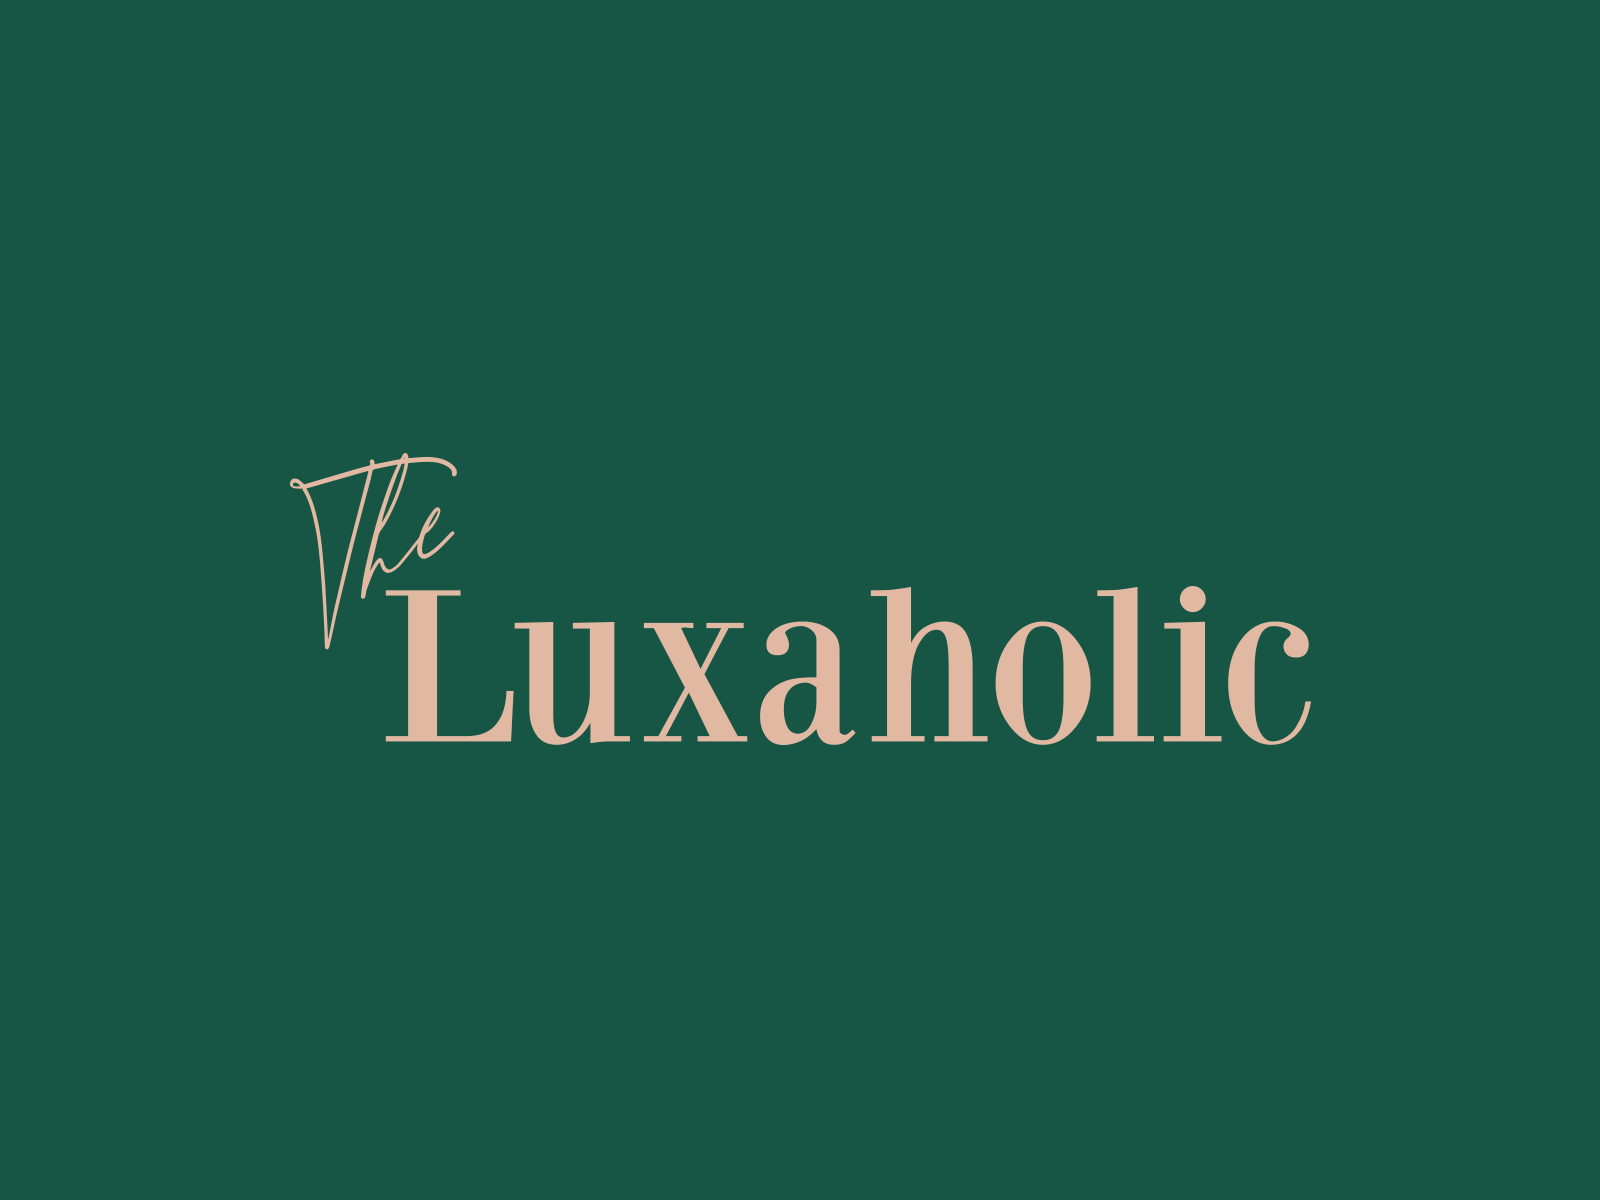 The Luxaholic